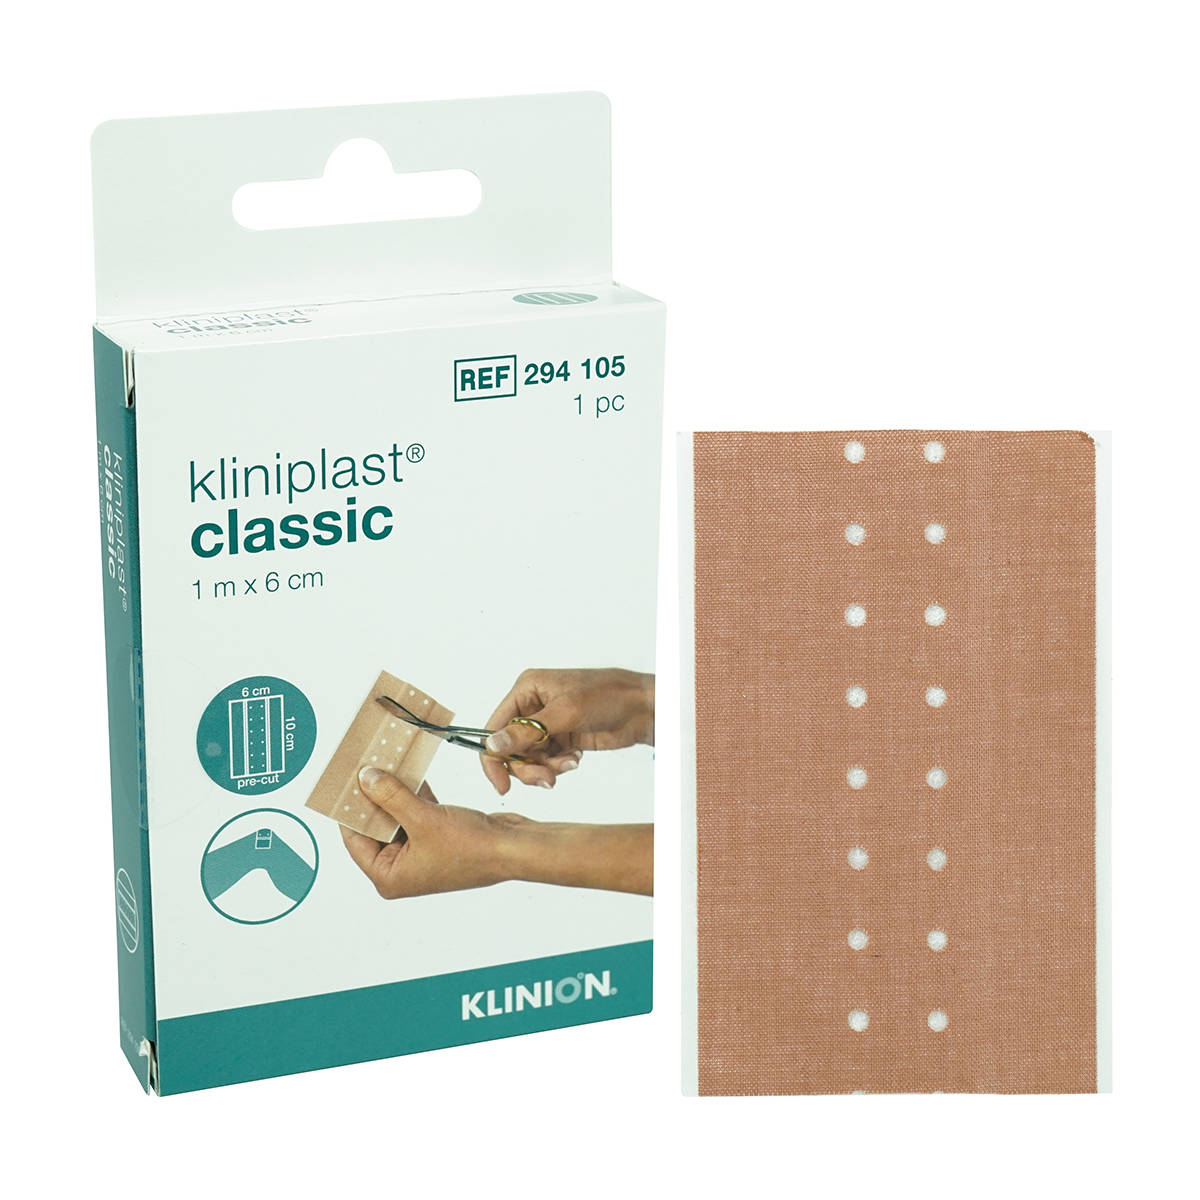 Classic plaster with box